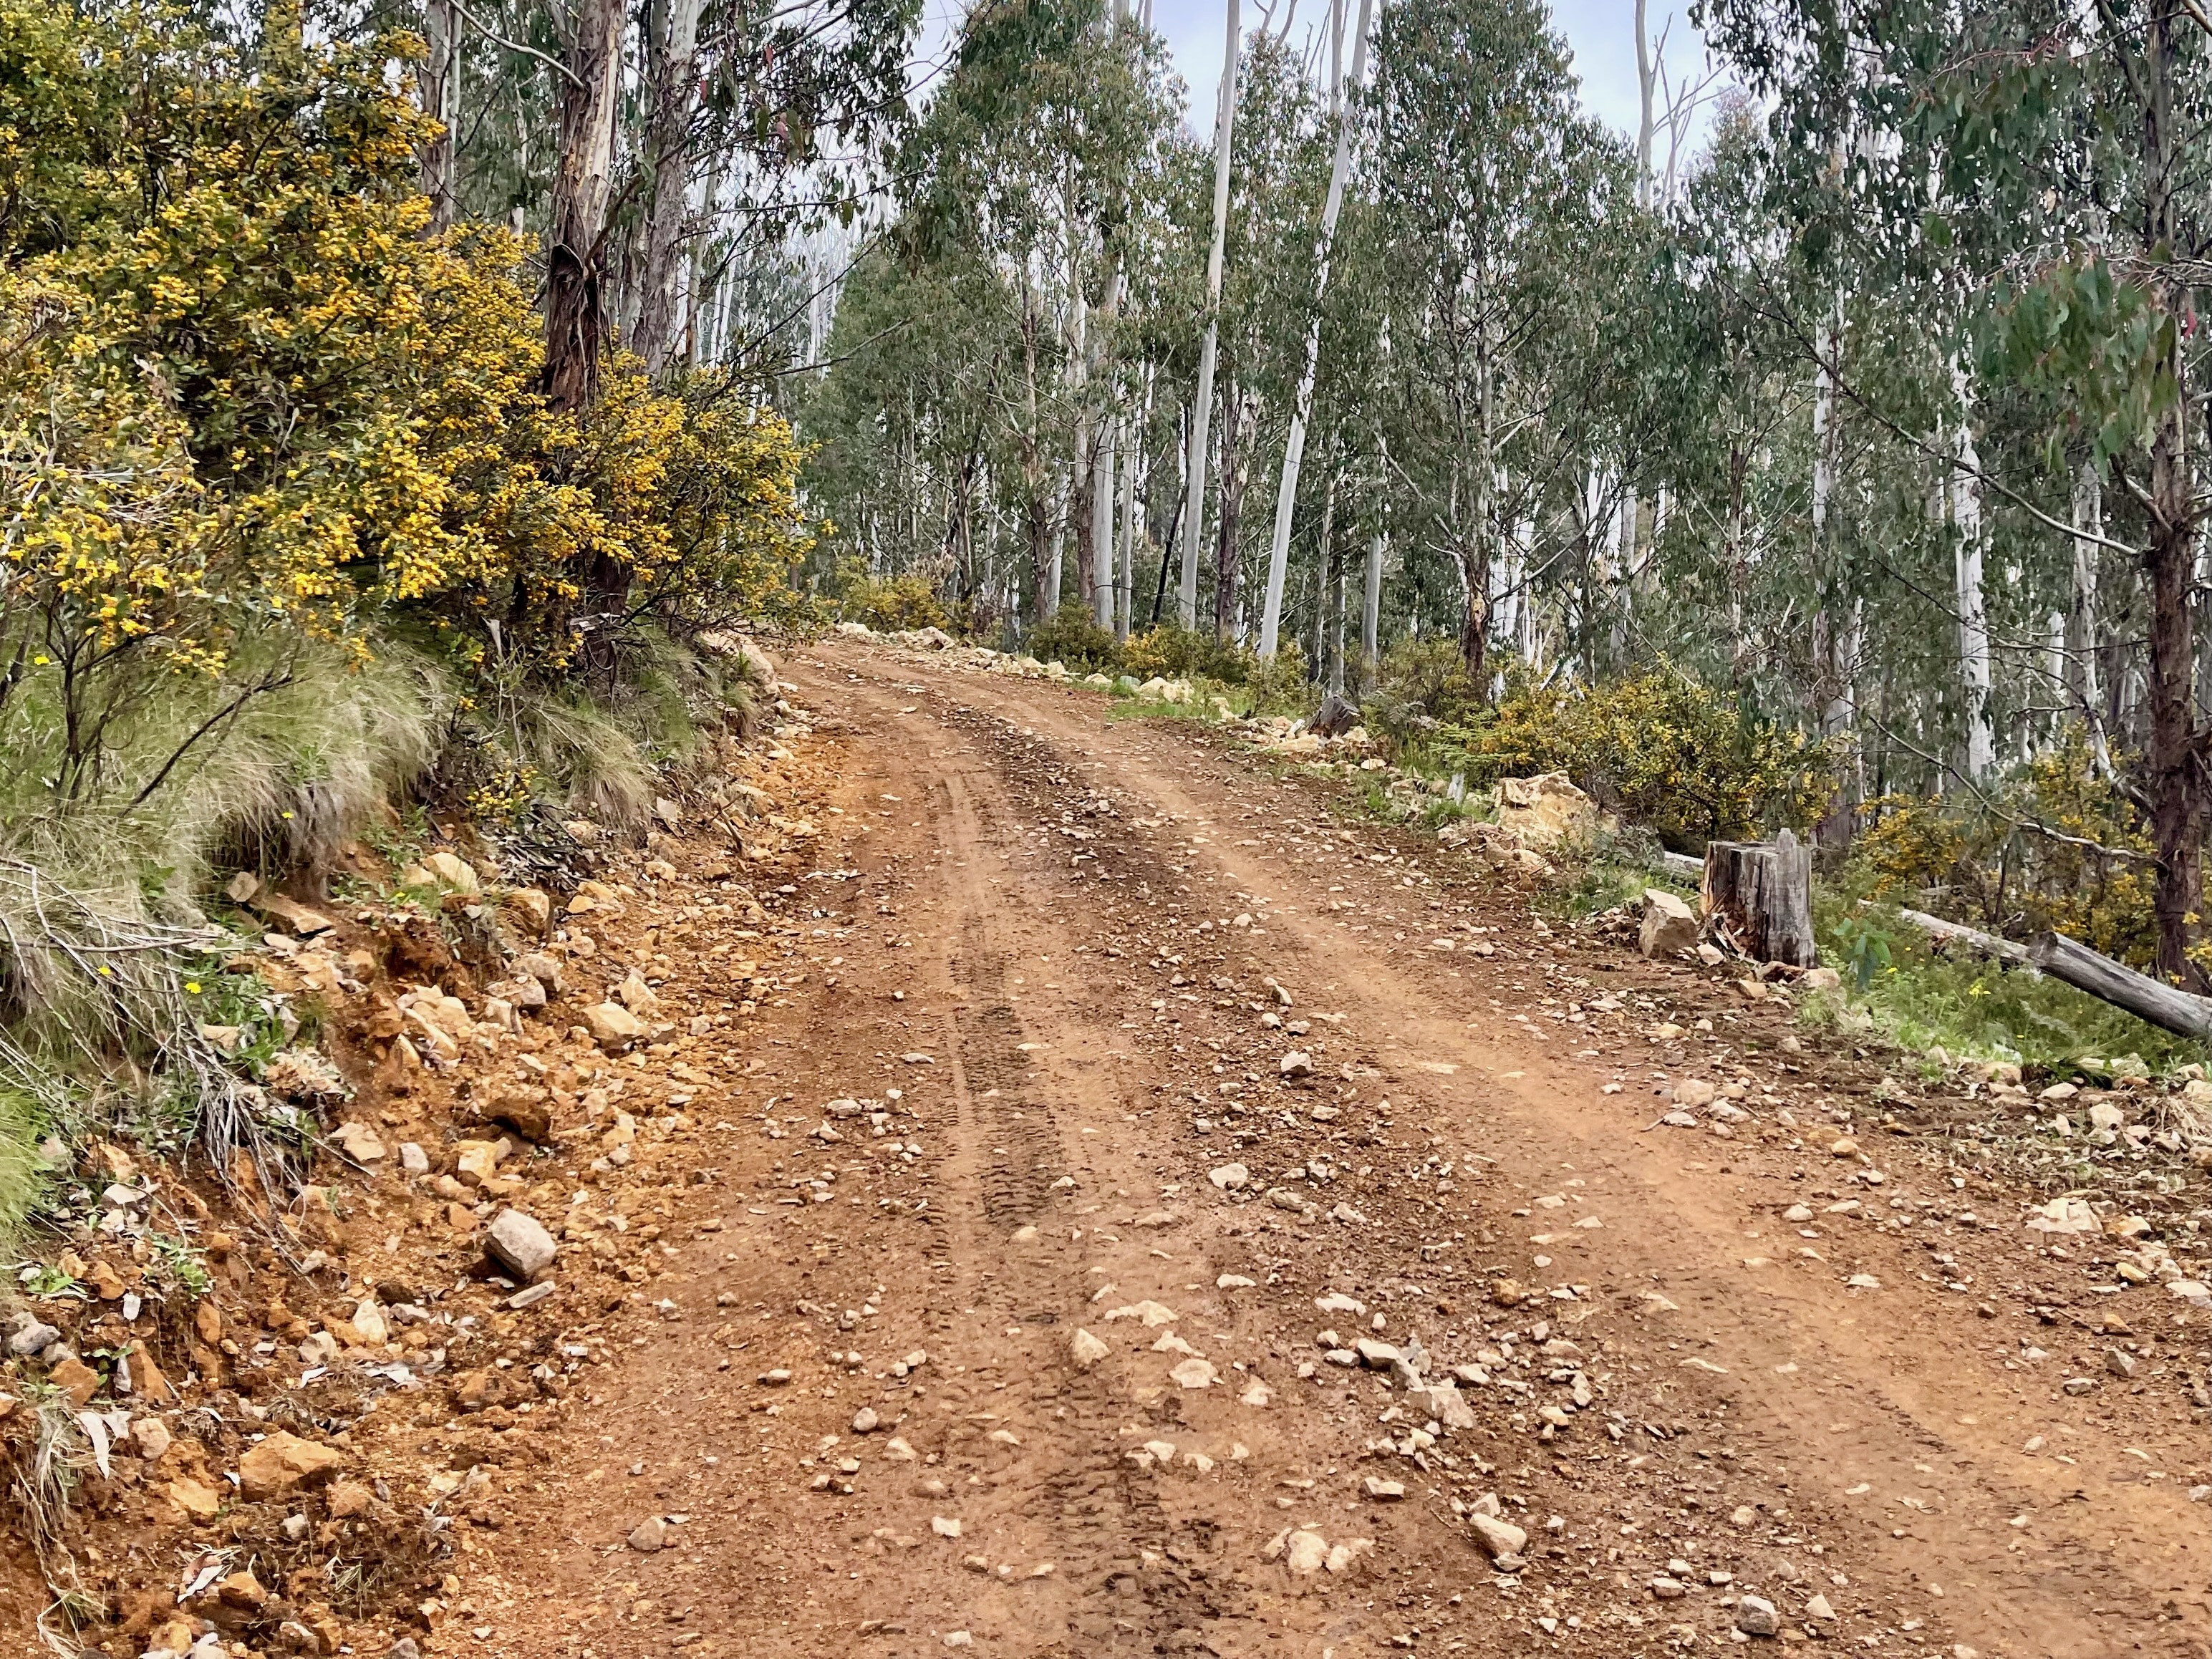 Rough dirt road descending through the native forest